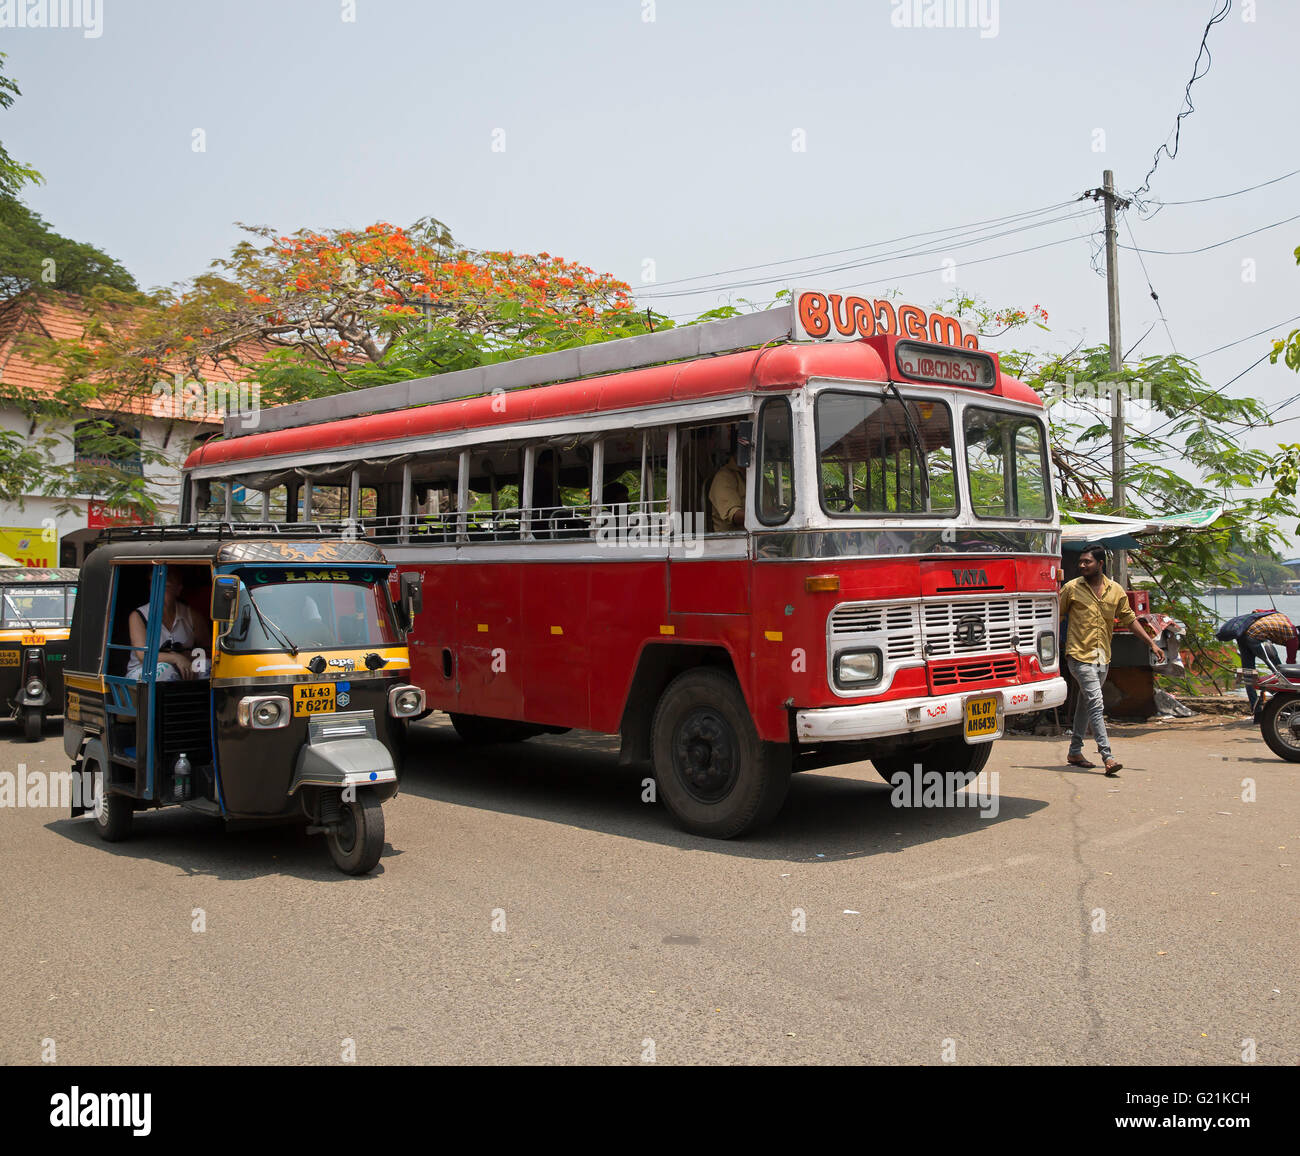 Tut Tut next to an old red bus in Cochin India Stock Photo